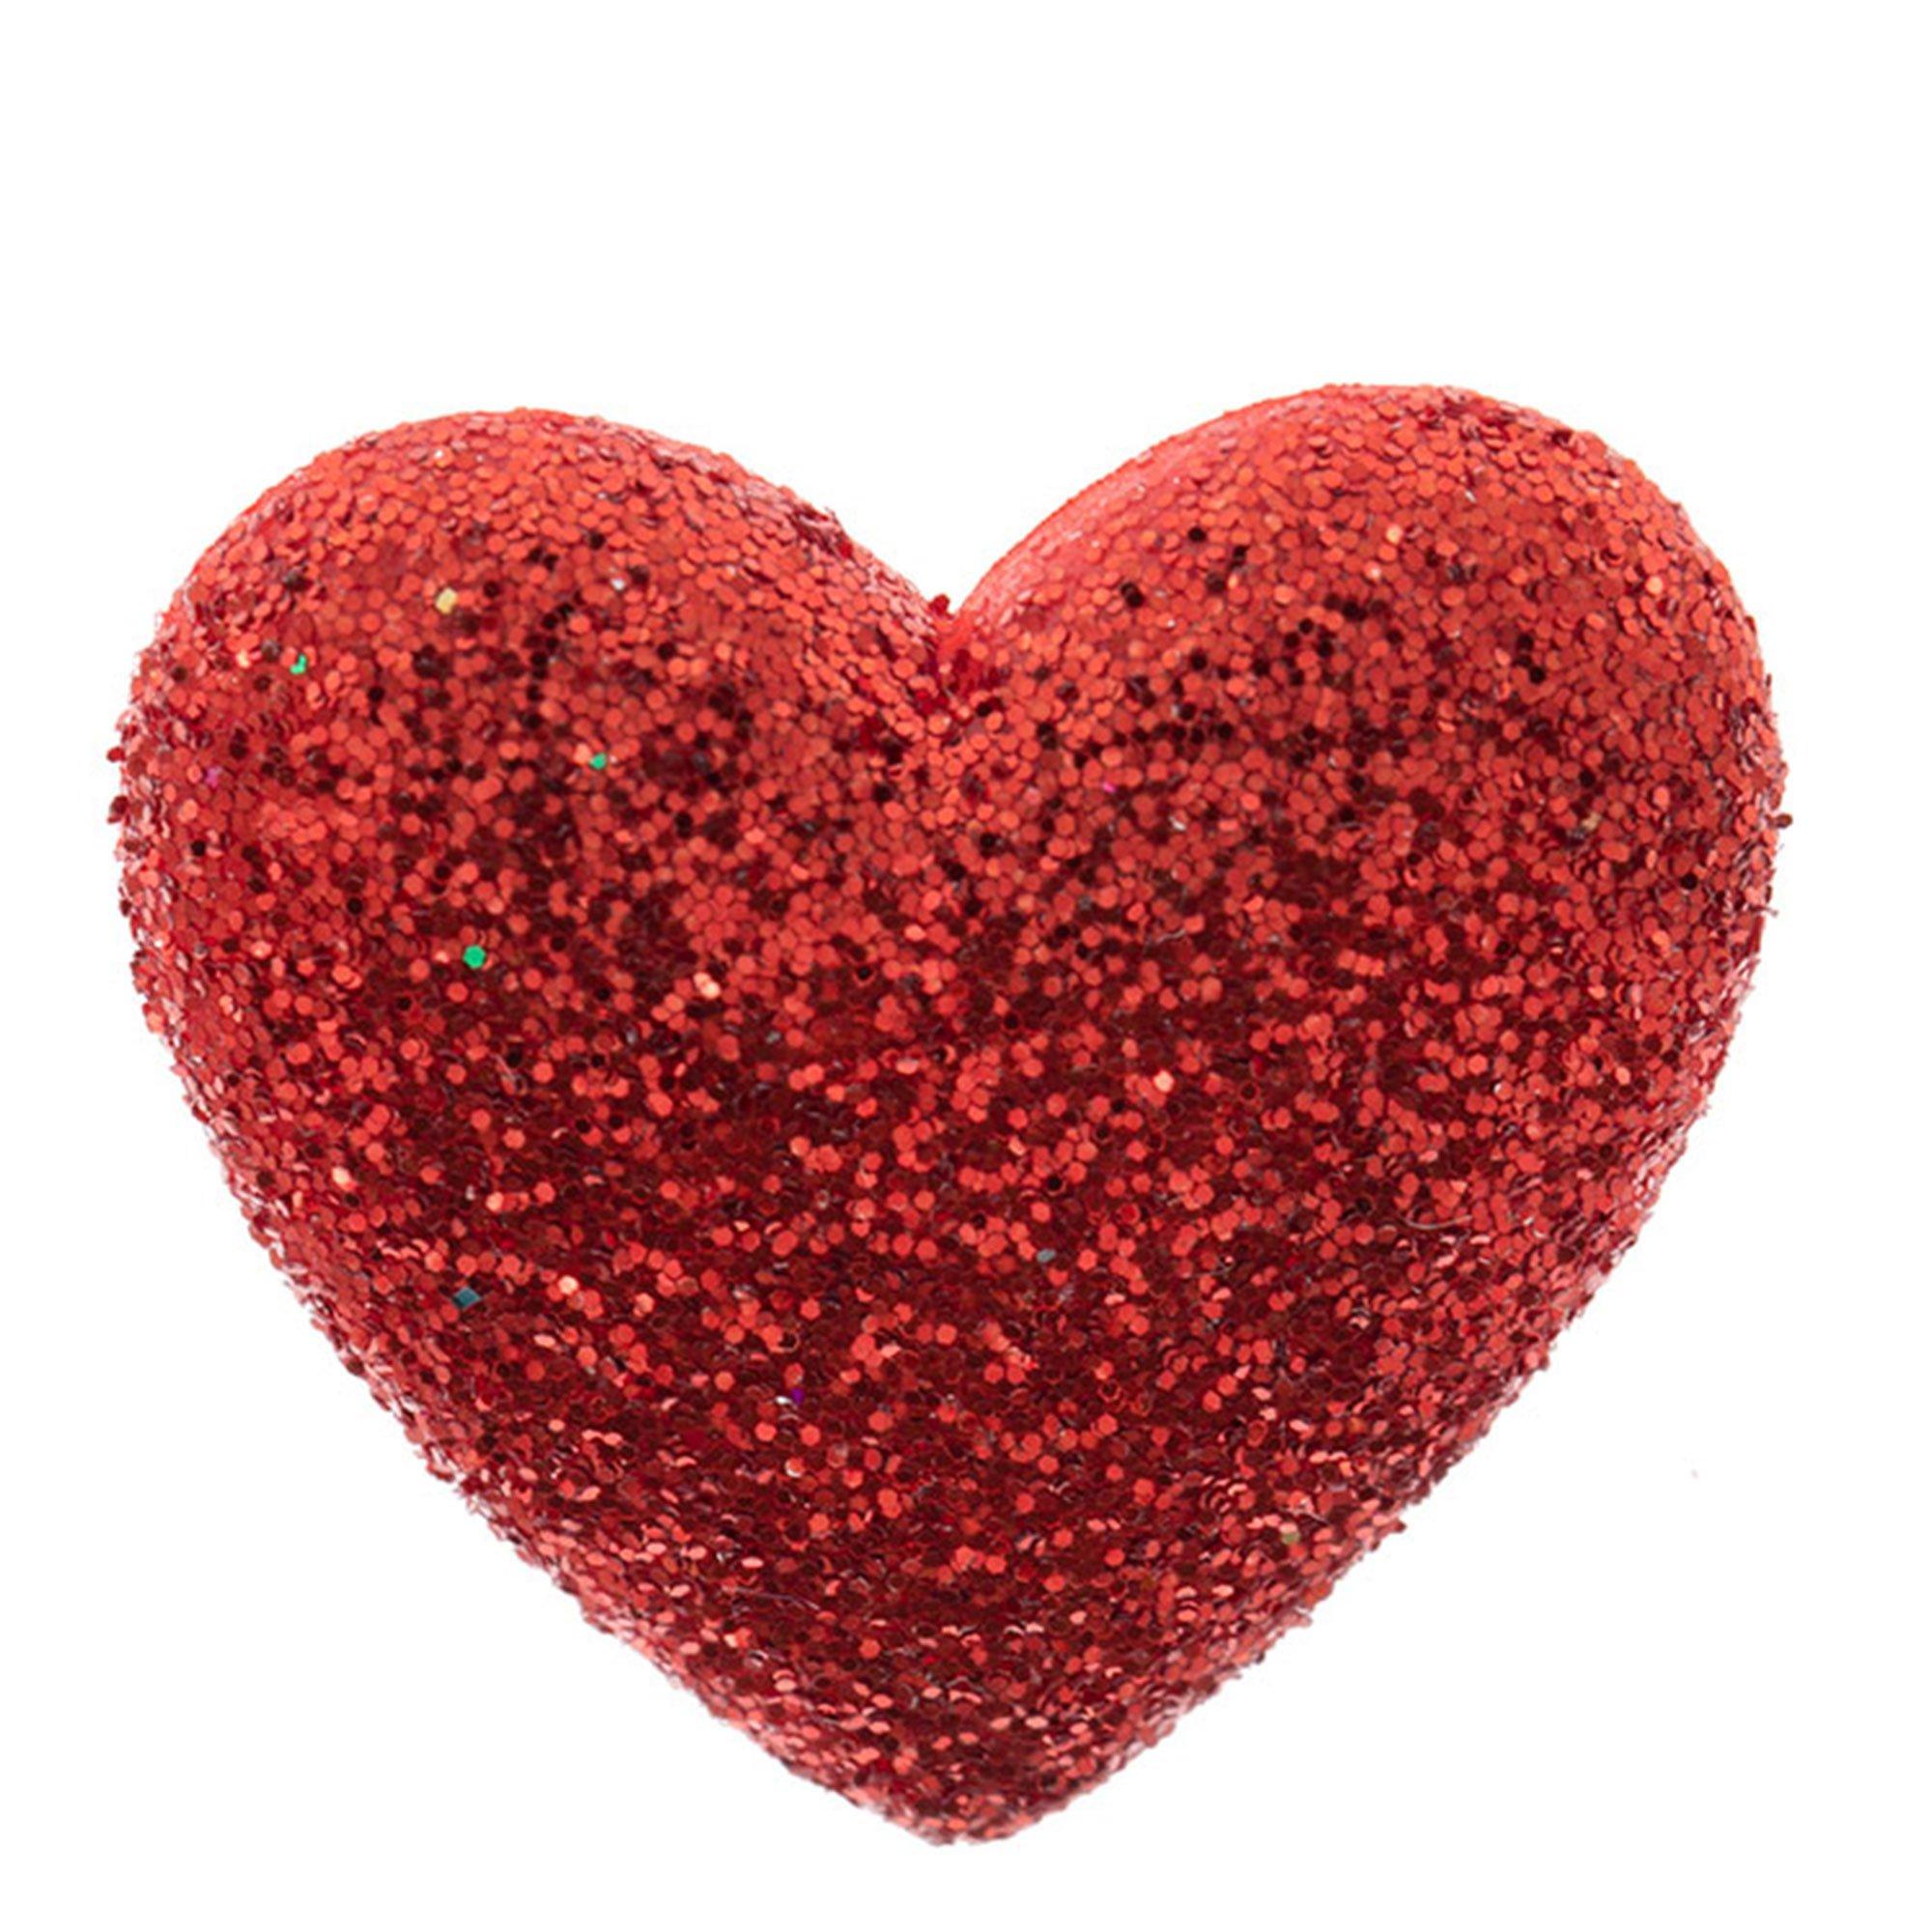  Zeyune 300 Pcs Heart Buttons Valentine Red Pink Heart Buttons  Bulk Mini Heart Shape Sparkle Resin Buttons 12mm x 12mm Buttons for Crafts  3 Colors Cute Love Buttons for Valentine's Day